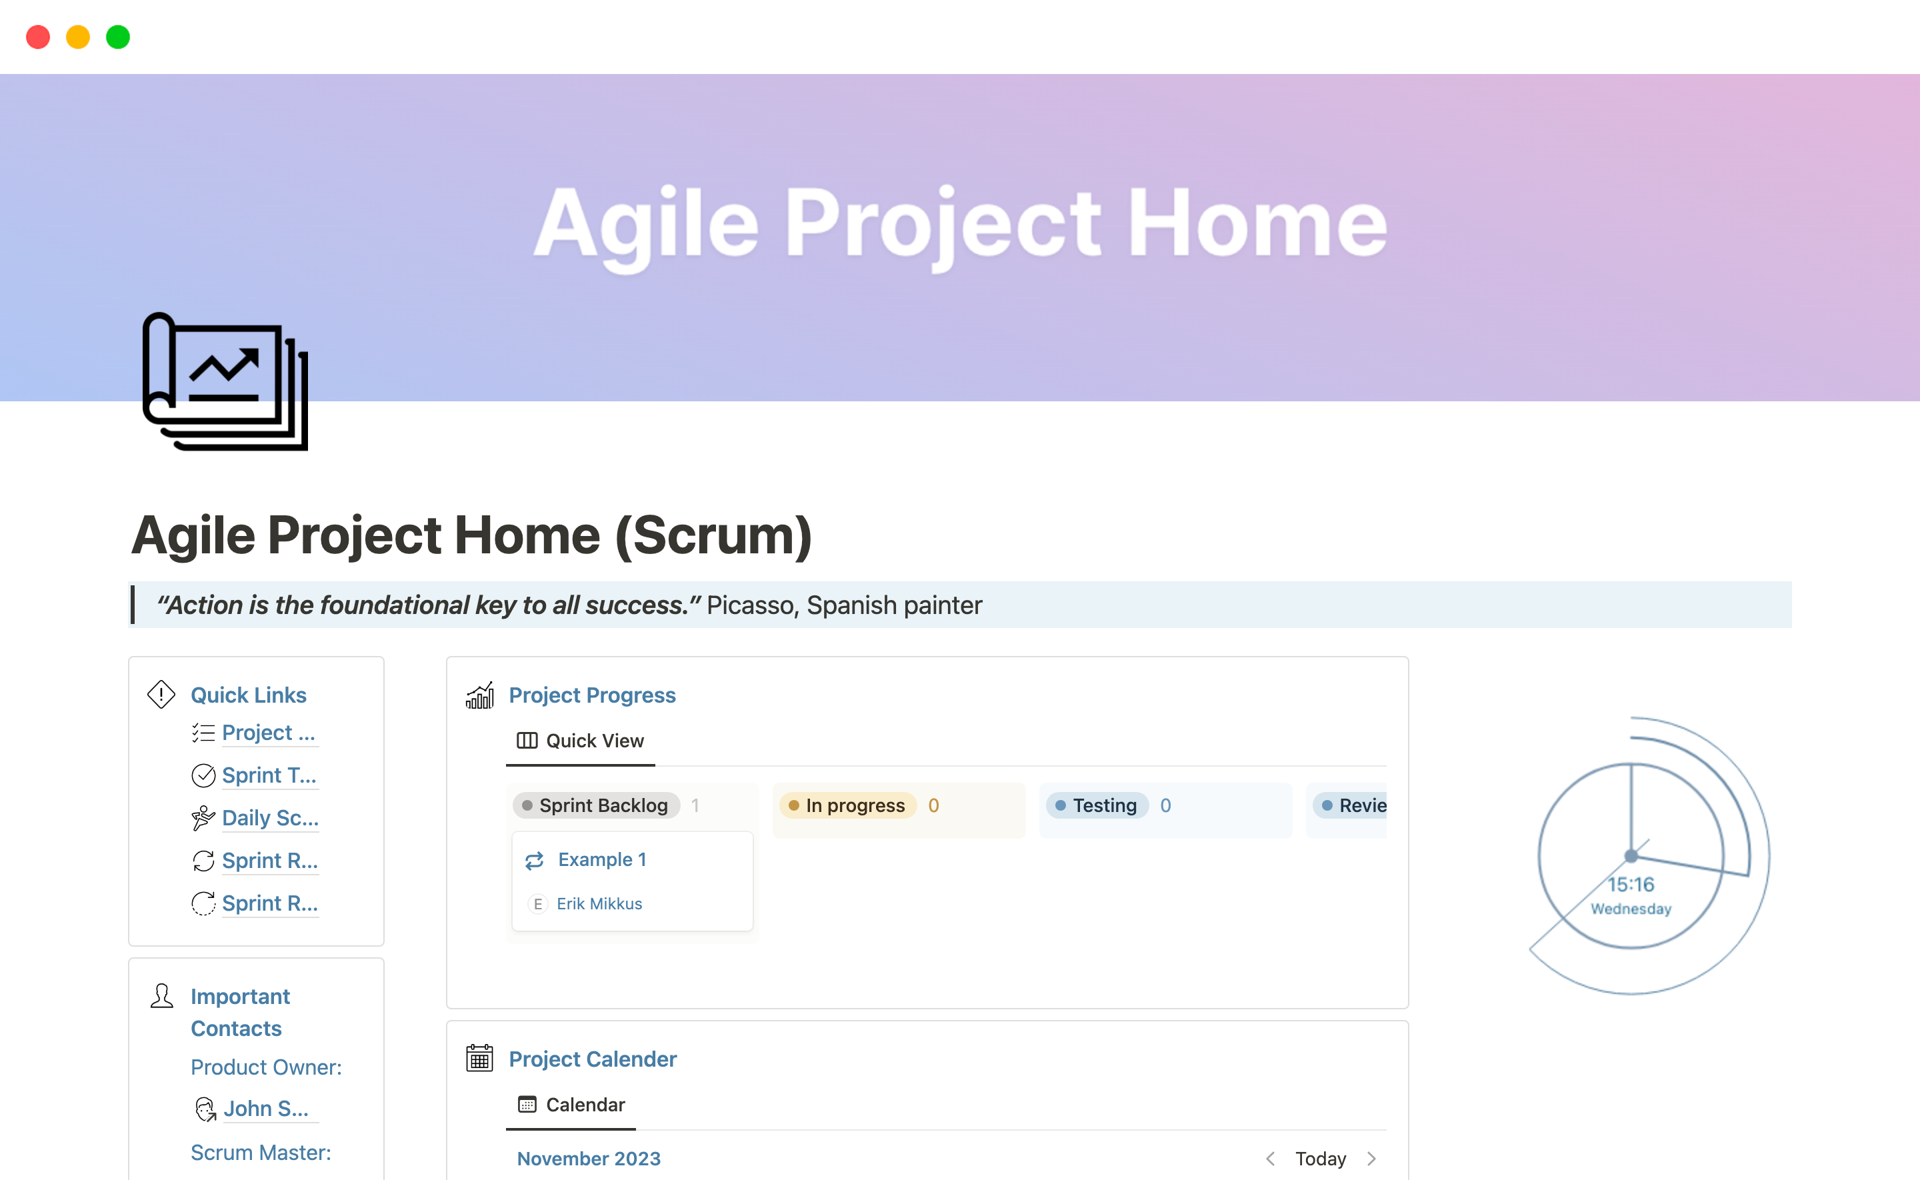 Whether you're a seasoned Scrum master or just starting with agile methodologies, this template will help you streamline your workflow, enhance collaboration, and drive your projects to success.